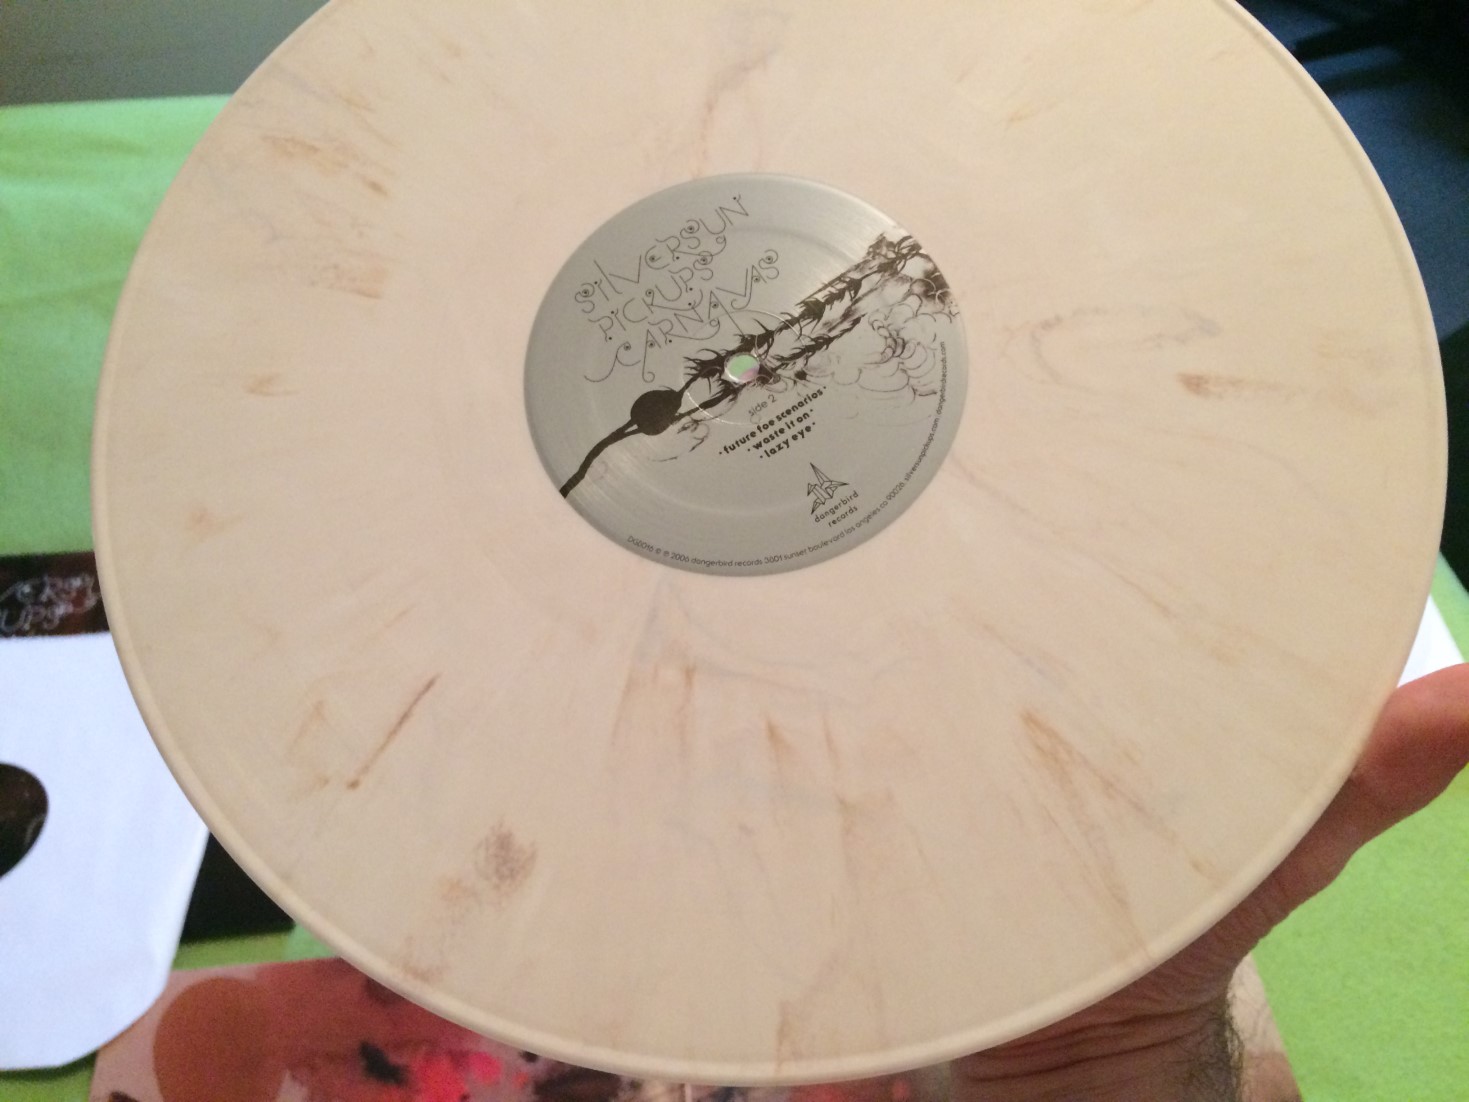 The marbled texture on my pressing of Carnavas